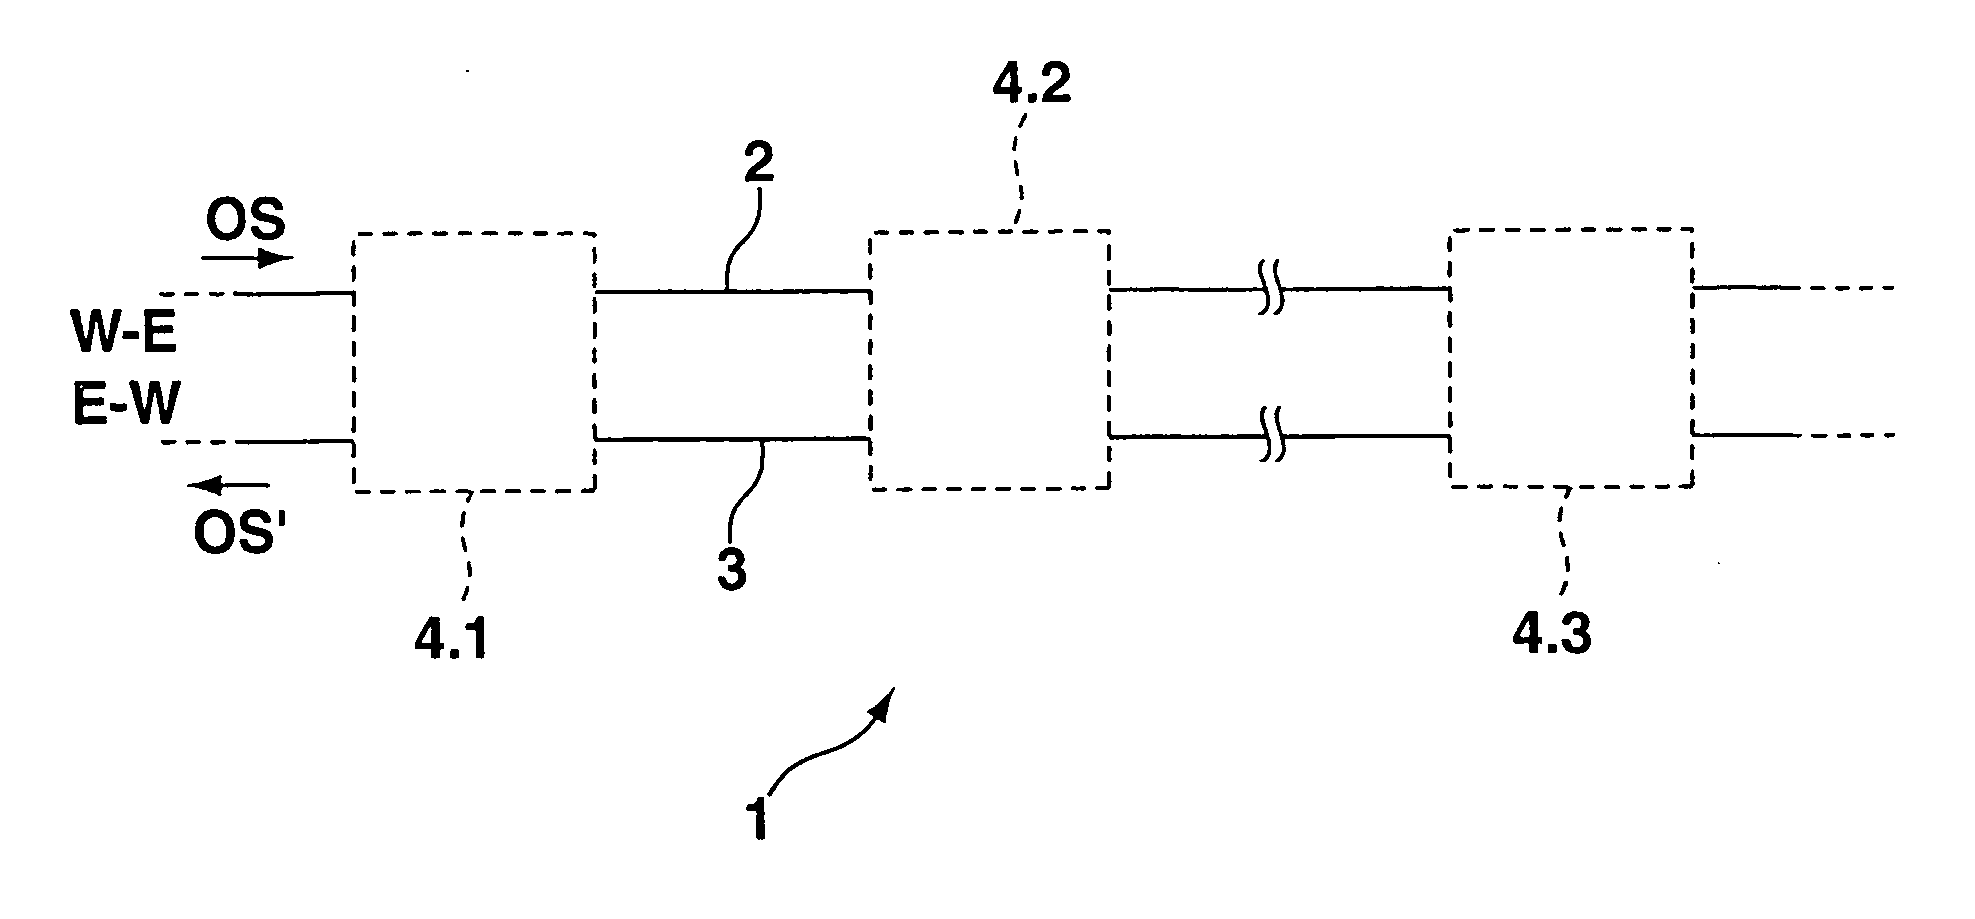 Optical transmission system and optical filter assembly for submarine applications